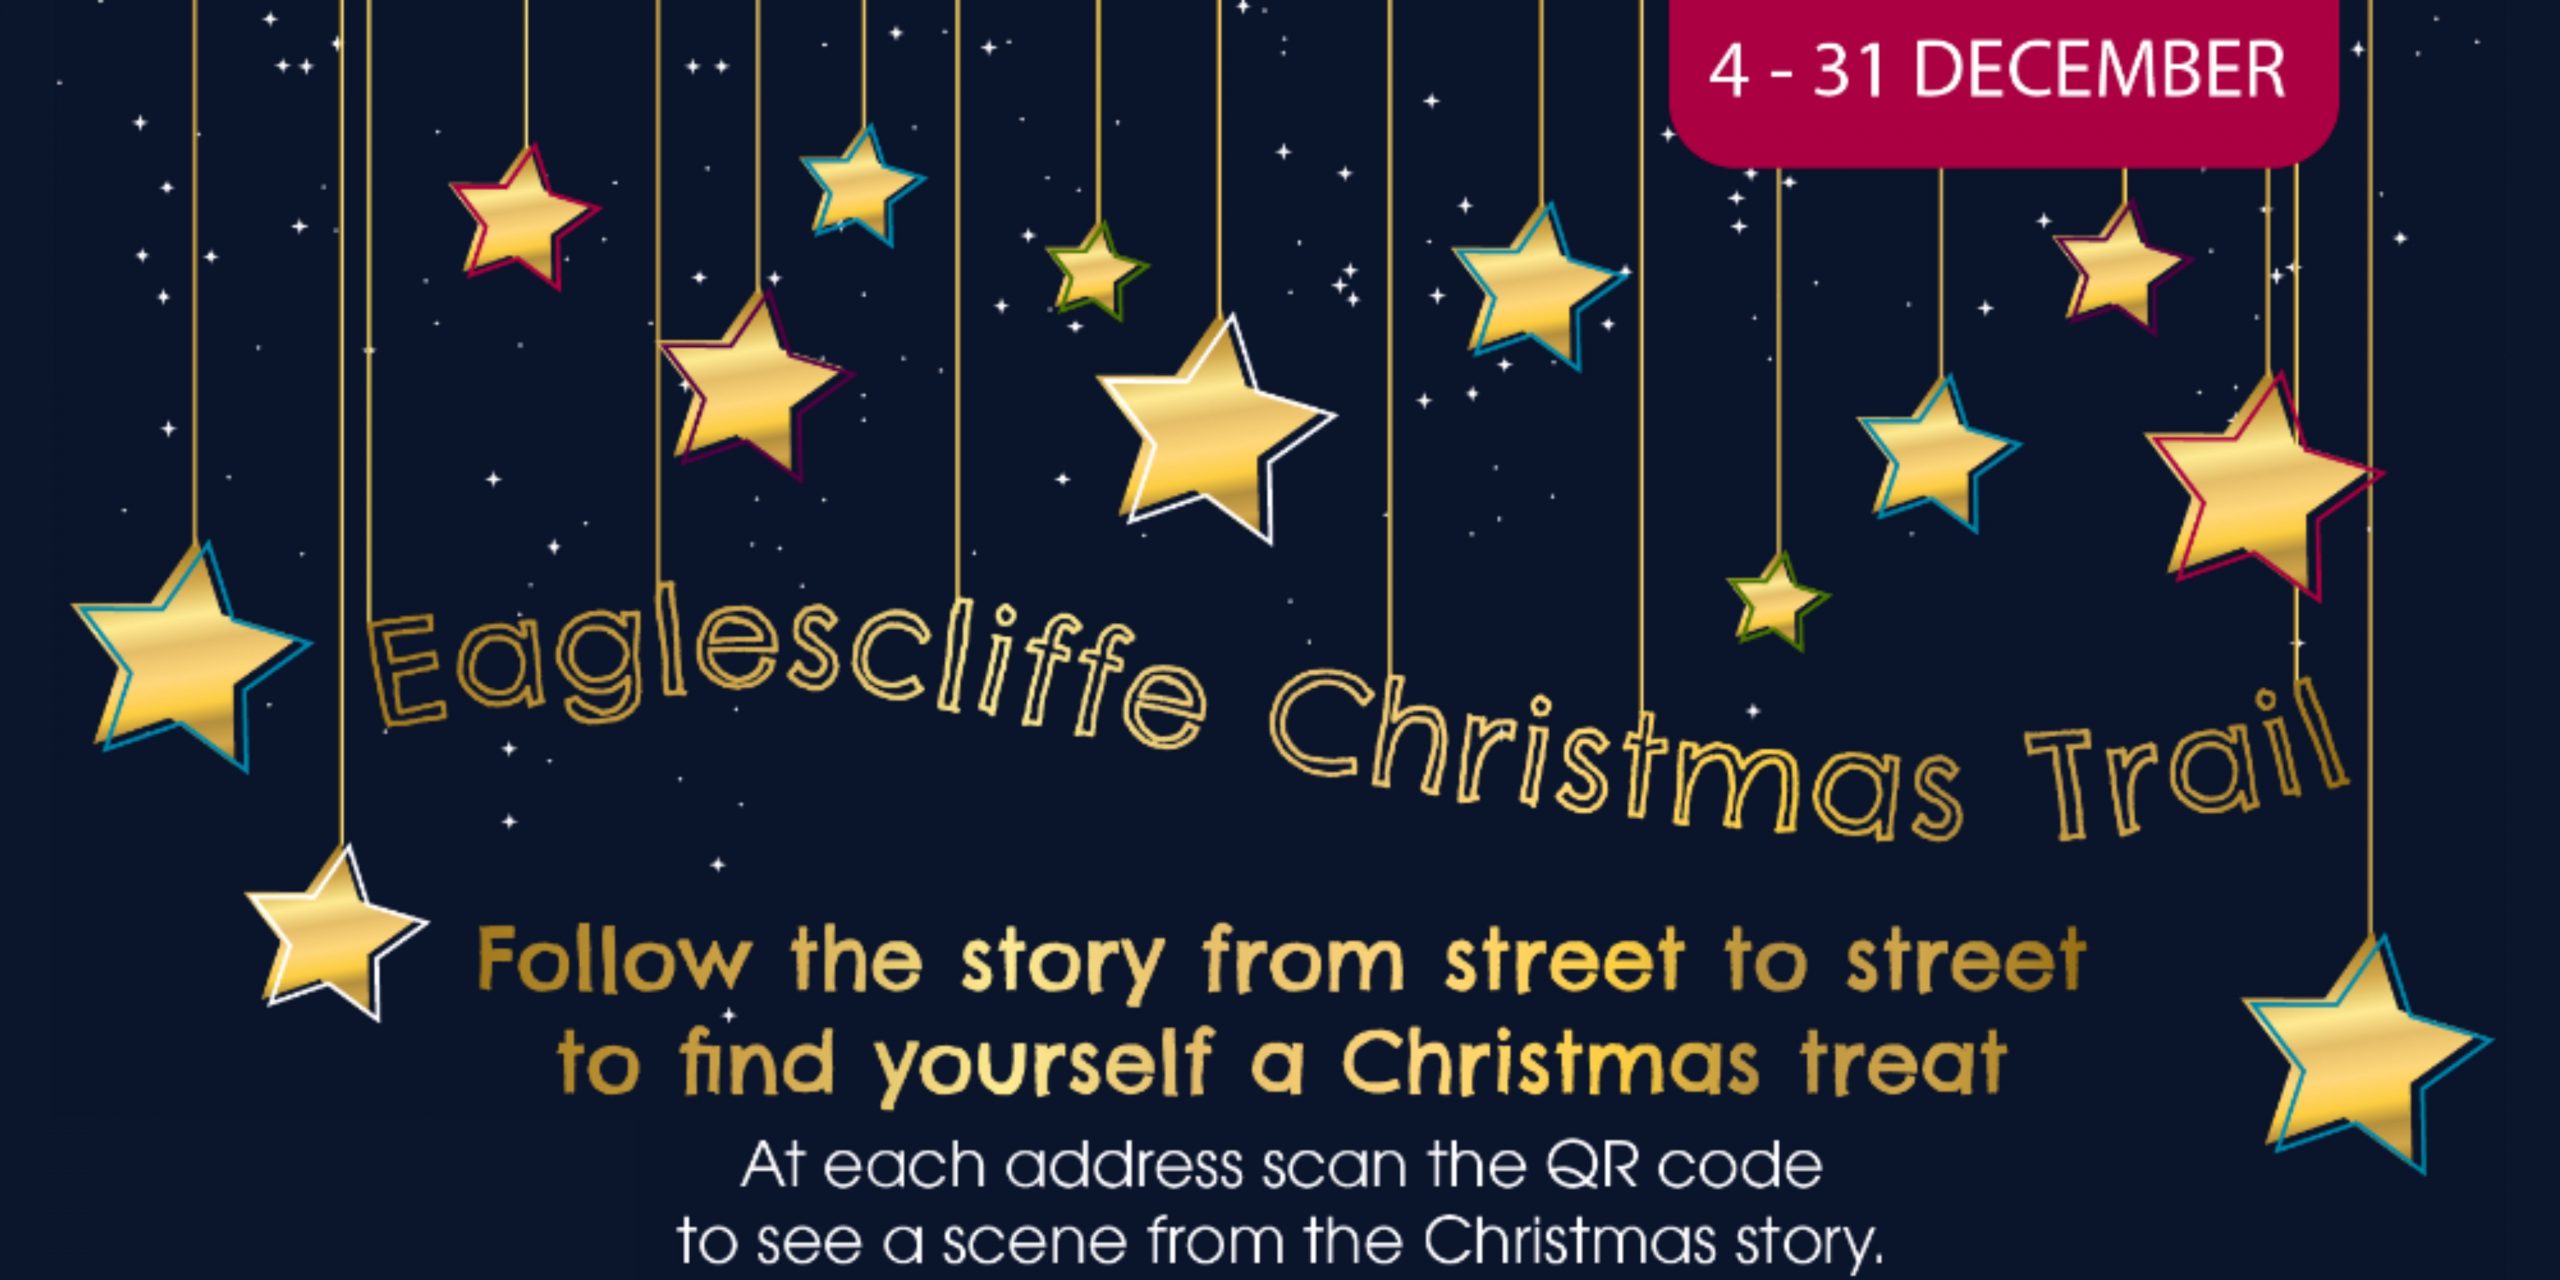 text graphic with stars - Eaglescliffe Christmas trail